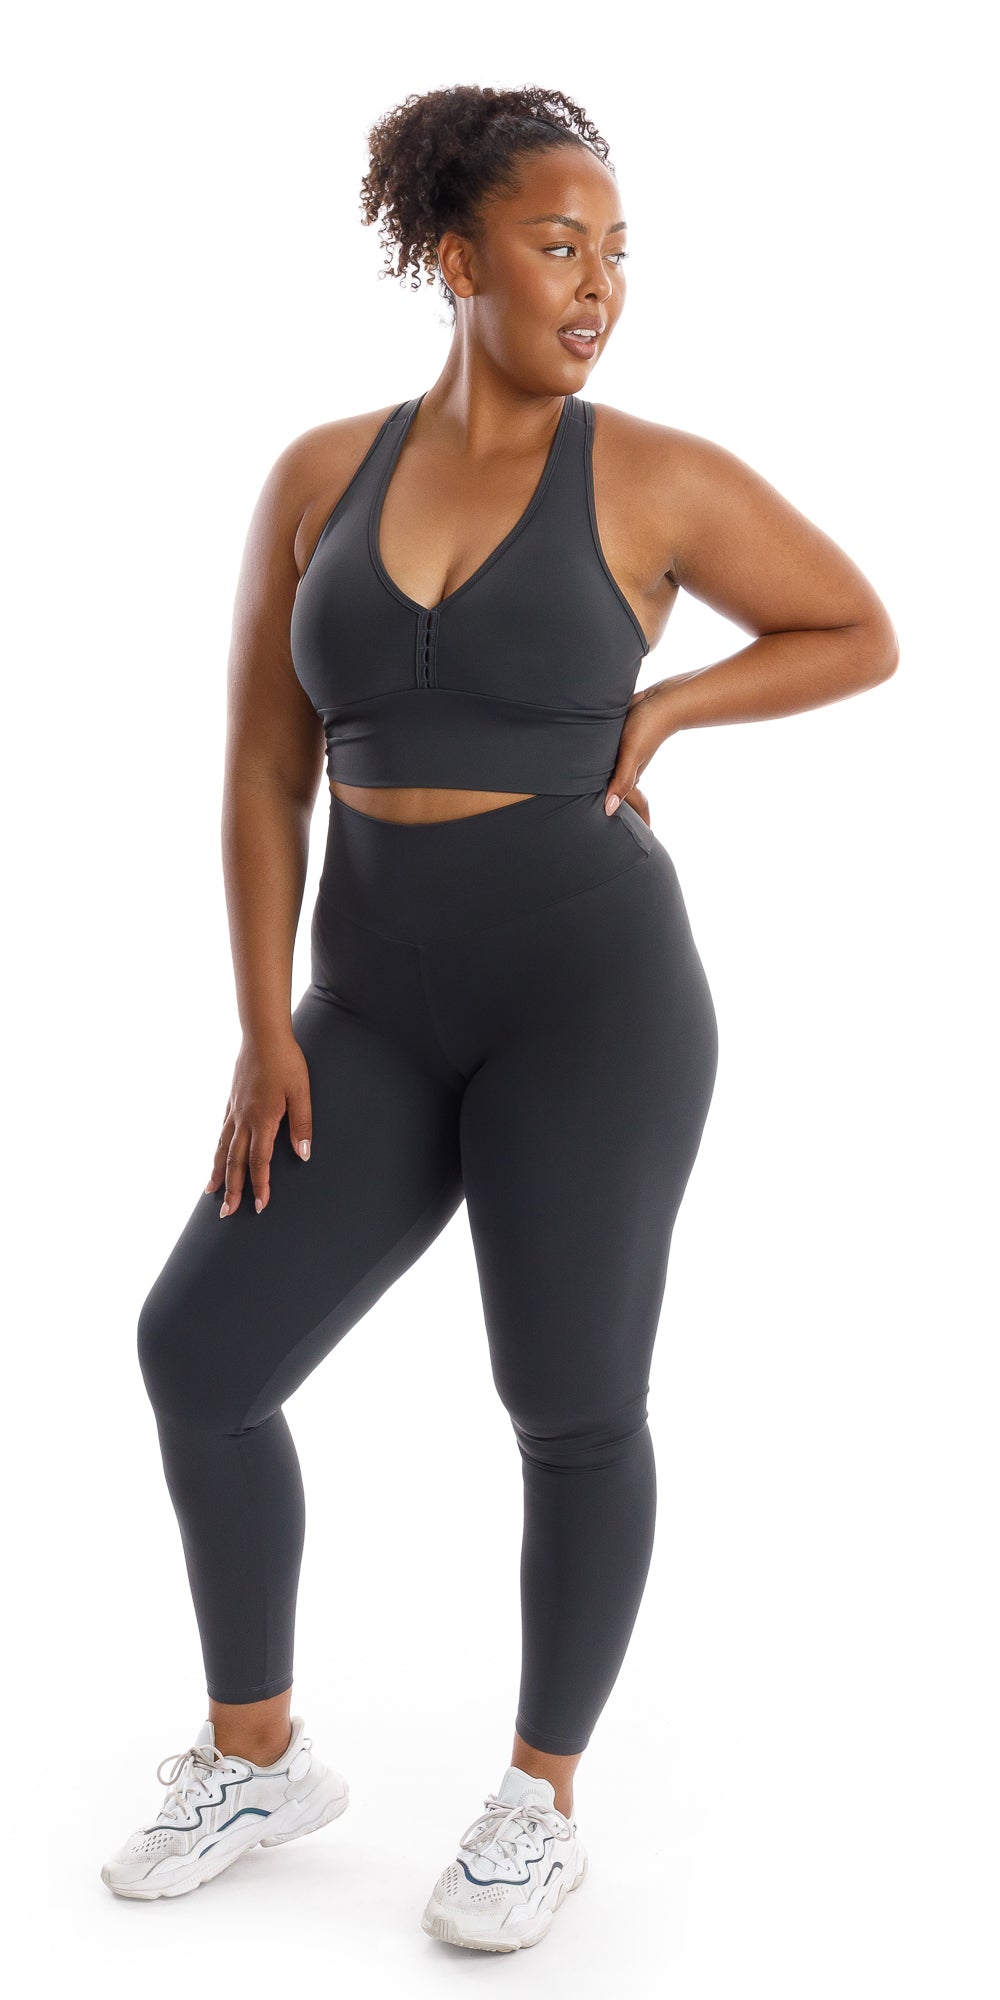 Full body front view of girl wearing grey Liquorice Body Luxe Racer Back Bra and matching leggings putting one hand on waist